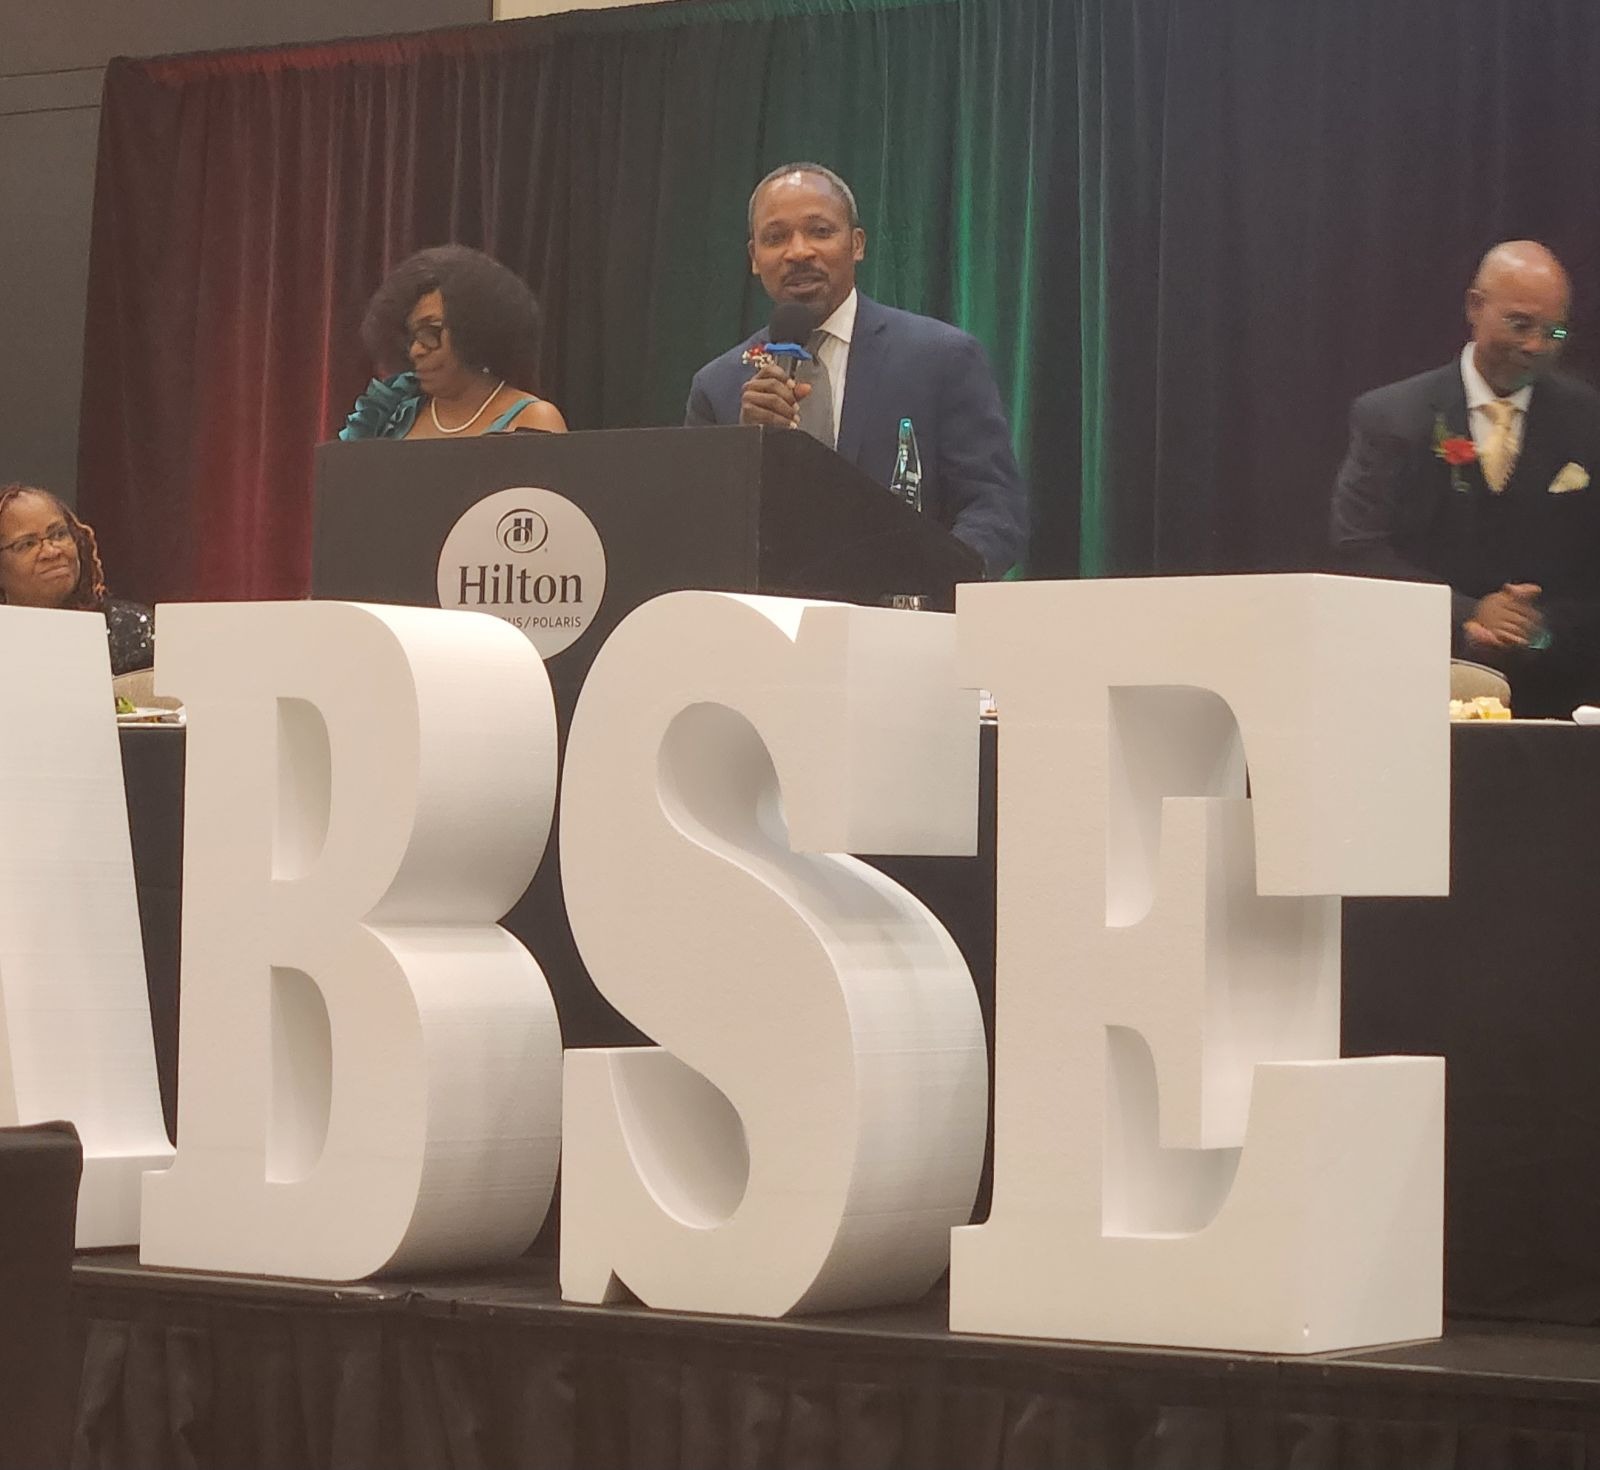 Dr. Jamison accepting his honor at the podium, behind large white letters that spelled out OABSE - not all the letters are visible in the photo.